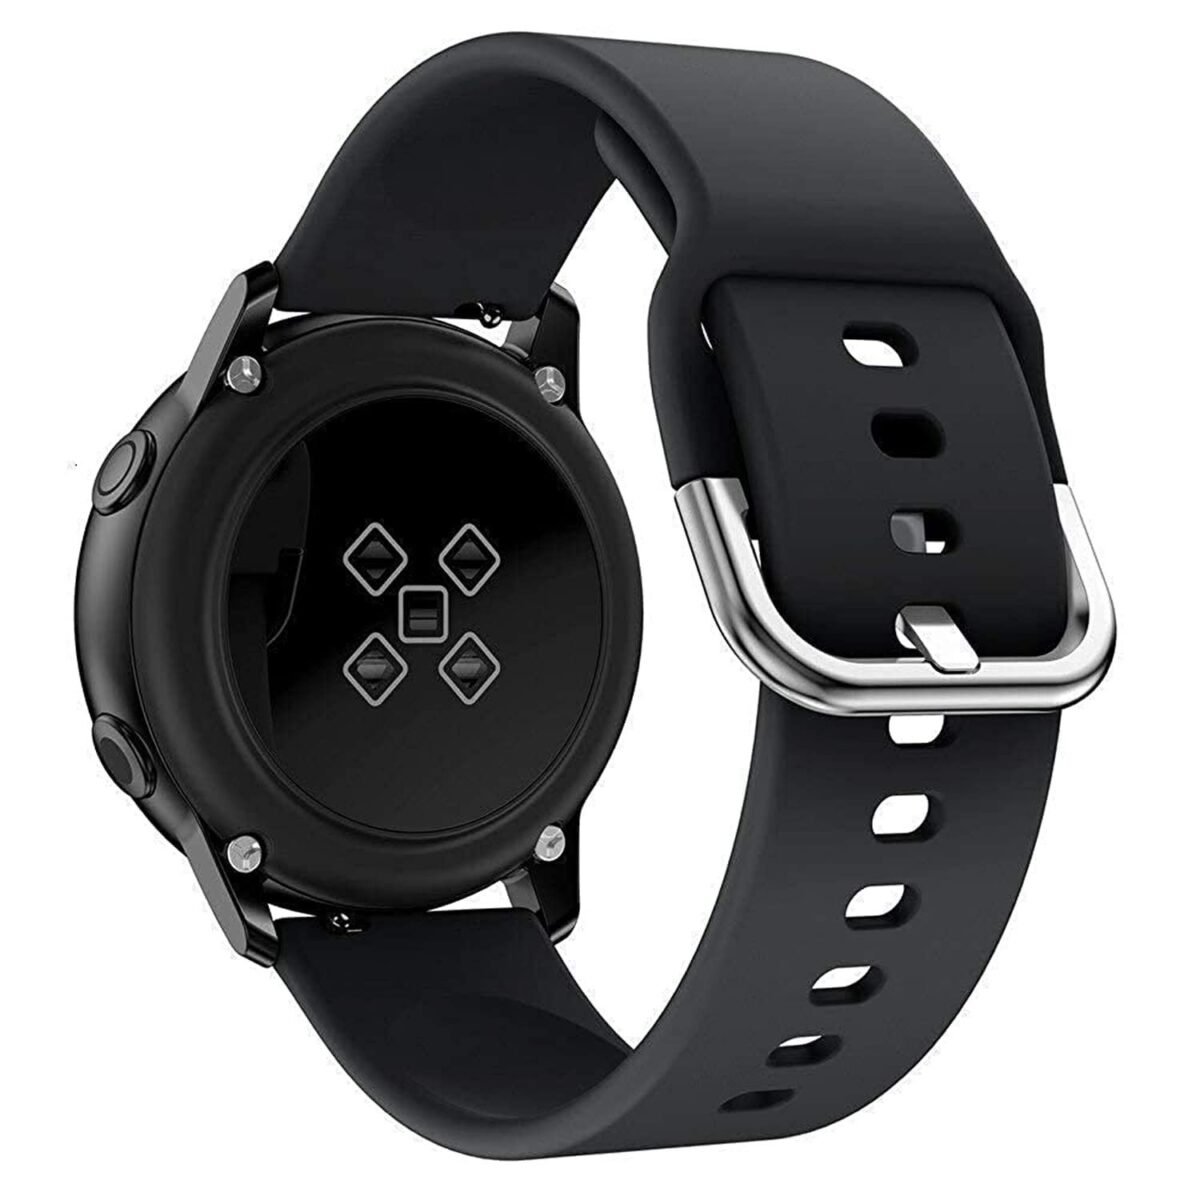 Gladiadora® 20mm Strap for Smart Watch with Stainless Steel Buckle Compatible with Amazfit Bip, Amazfit GTS, Galaxy Watch